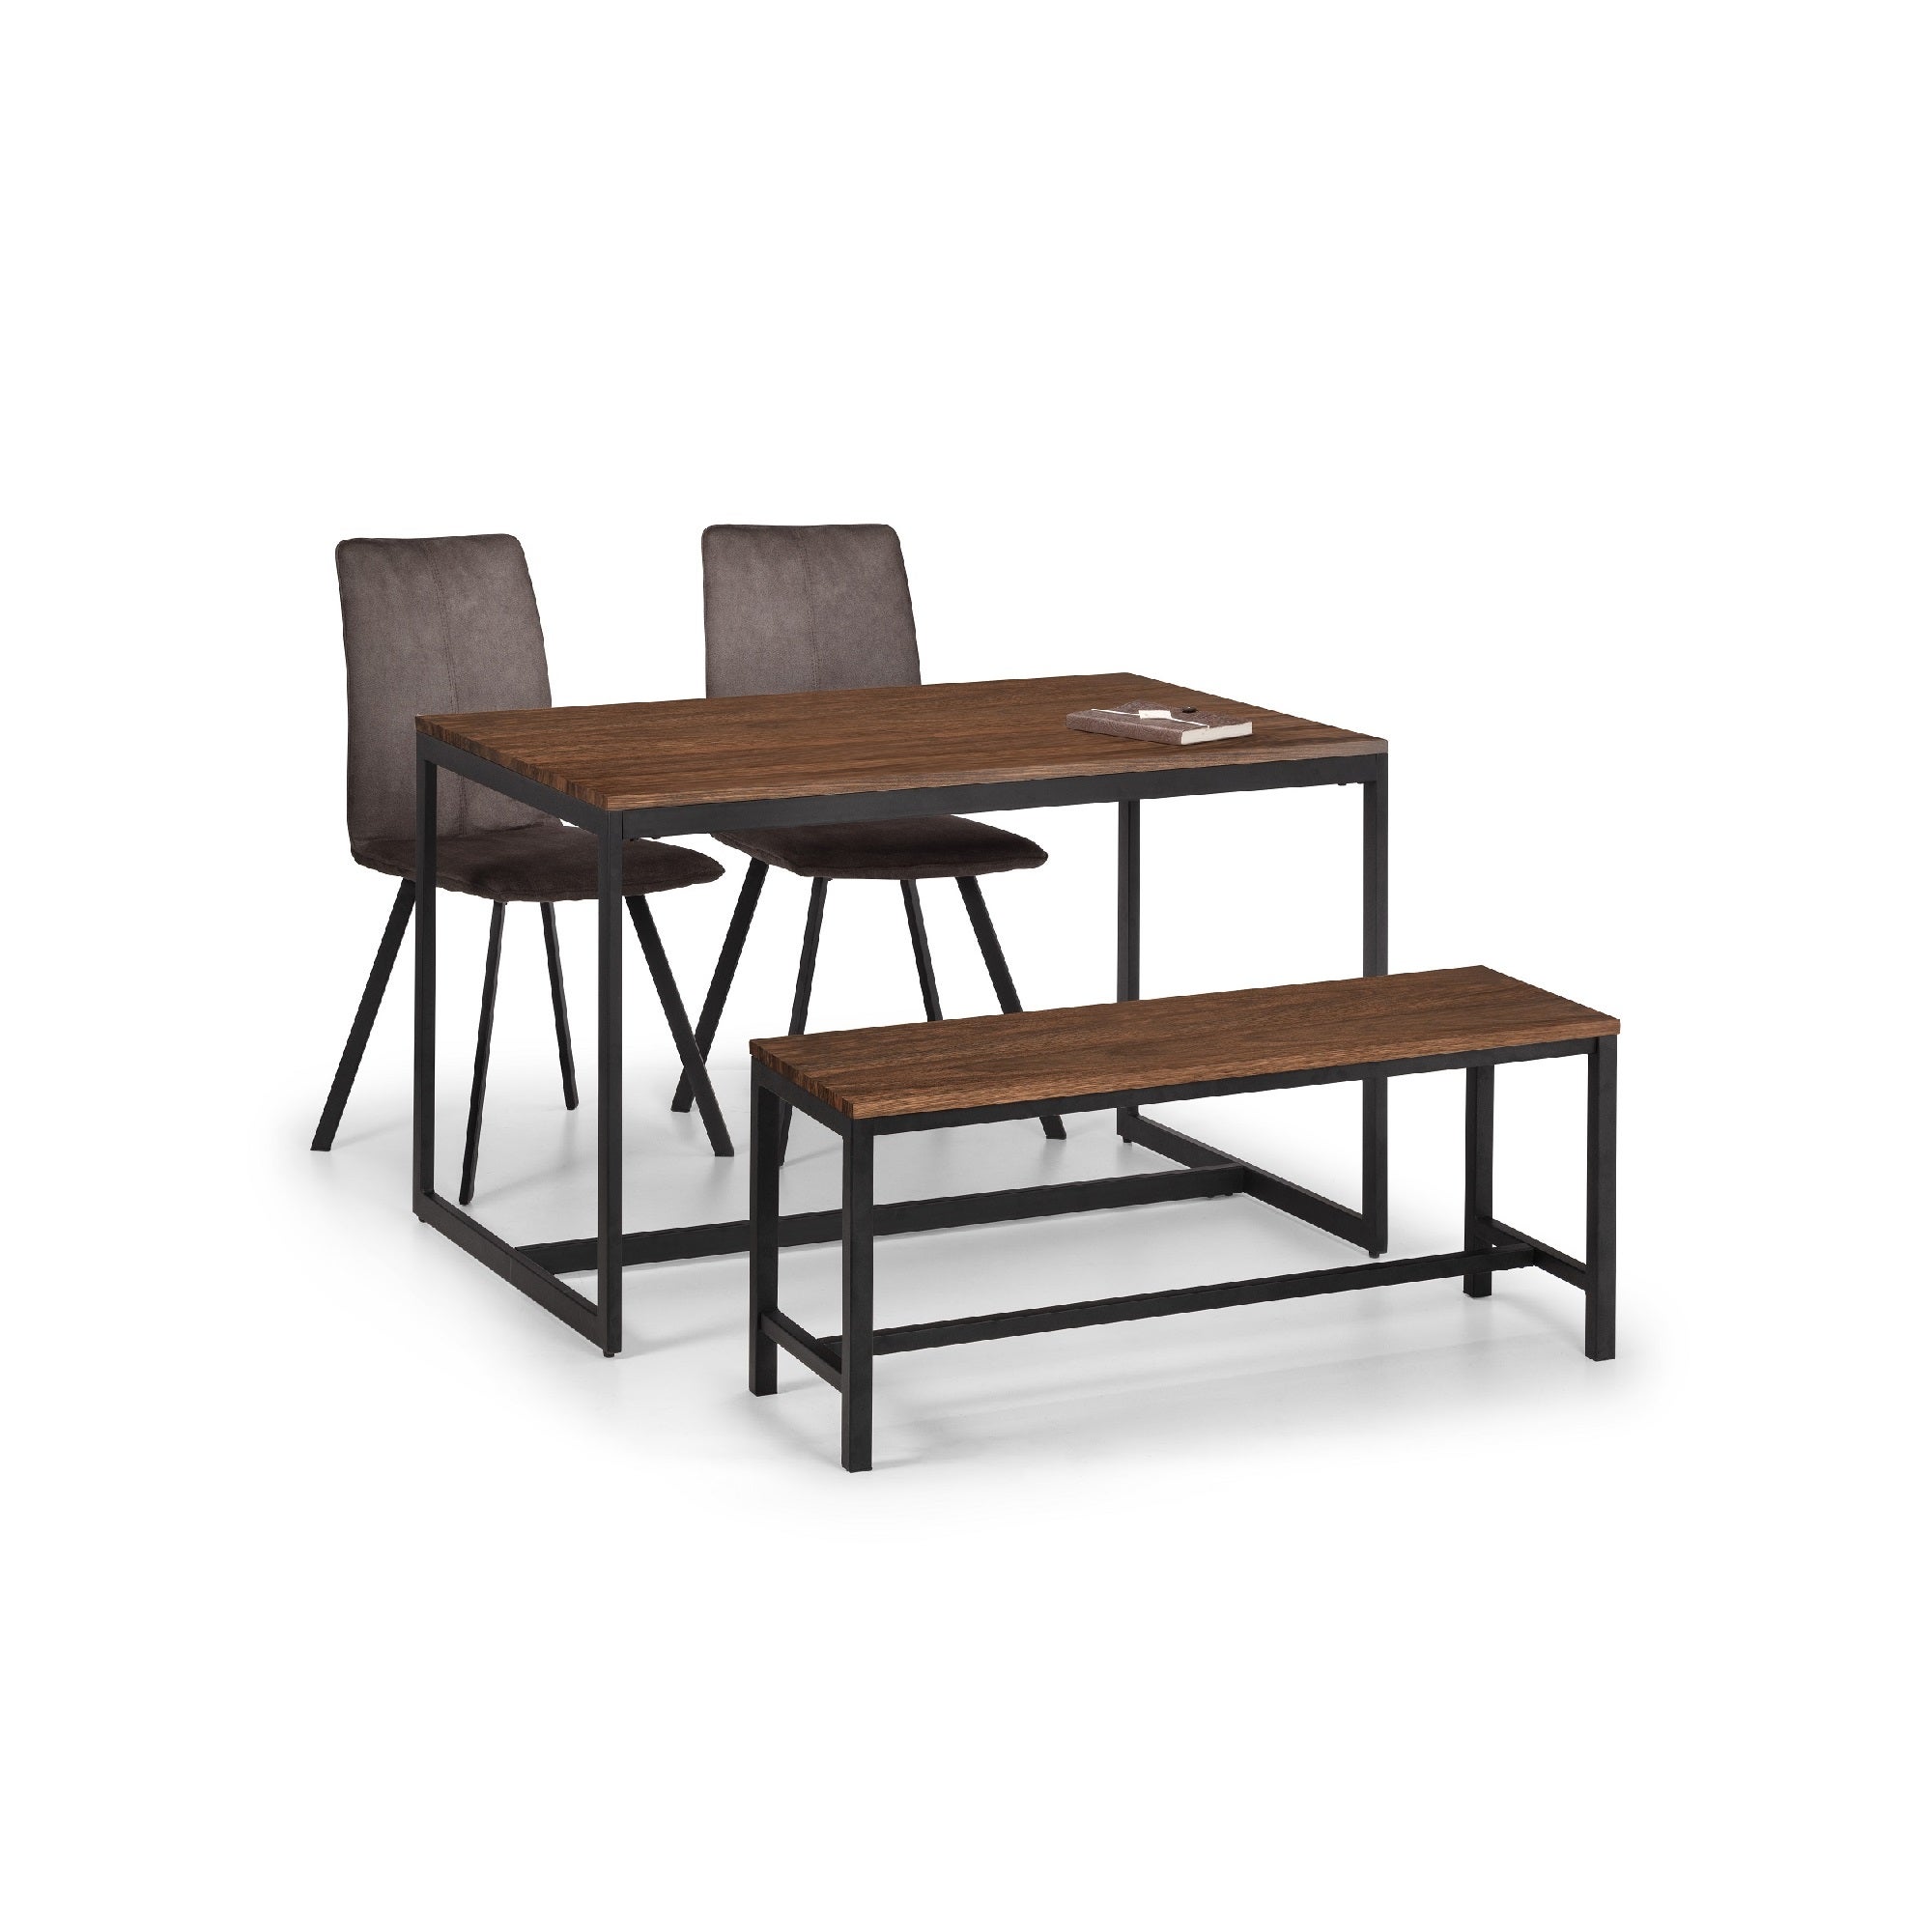 Tribeca Rectangular Dining Table With 2 Monroe Chairs And Bench Brown Brown